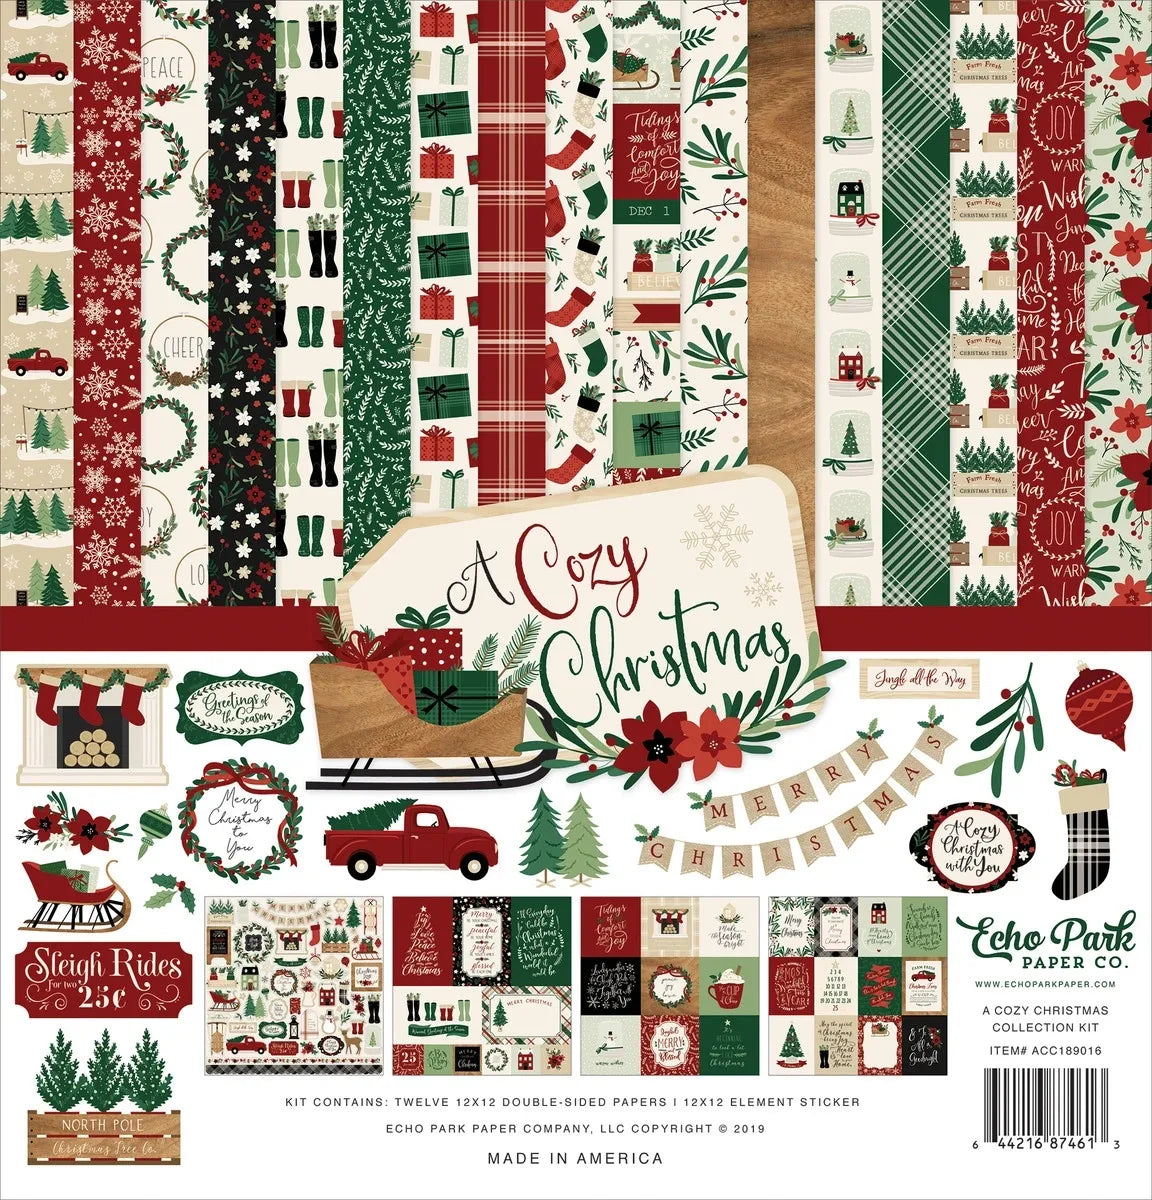 A Cozy Christmas Collection Kit